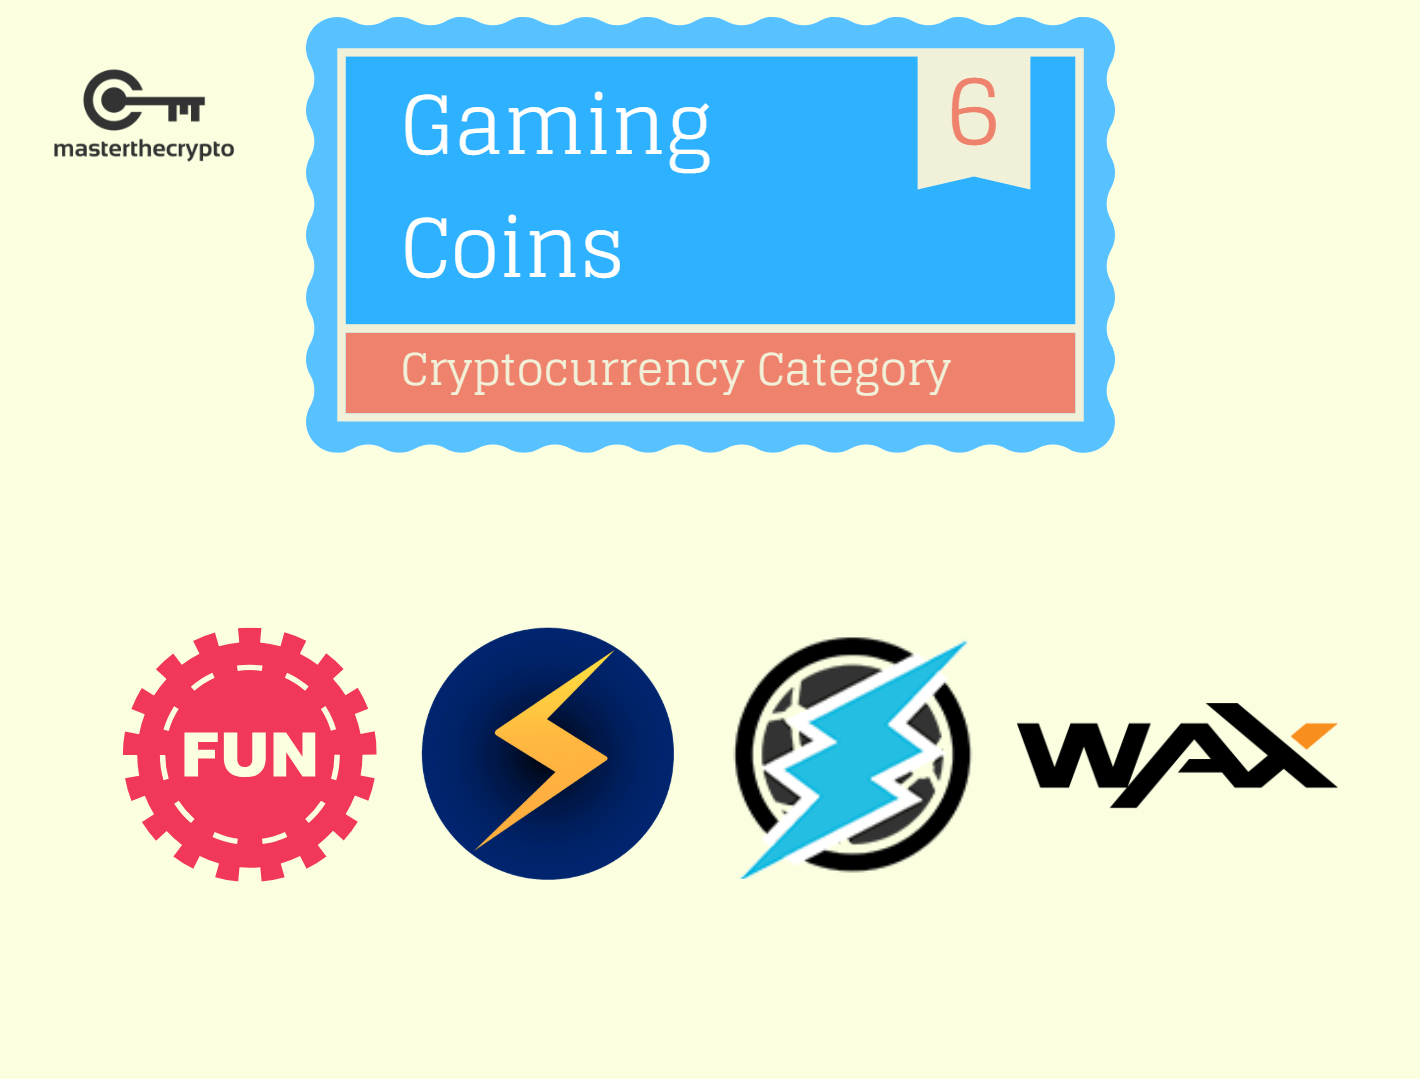 Gaming, gaming coins, gambling, gambling coins, gaming cryptocurrency